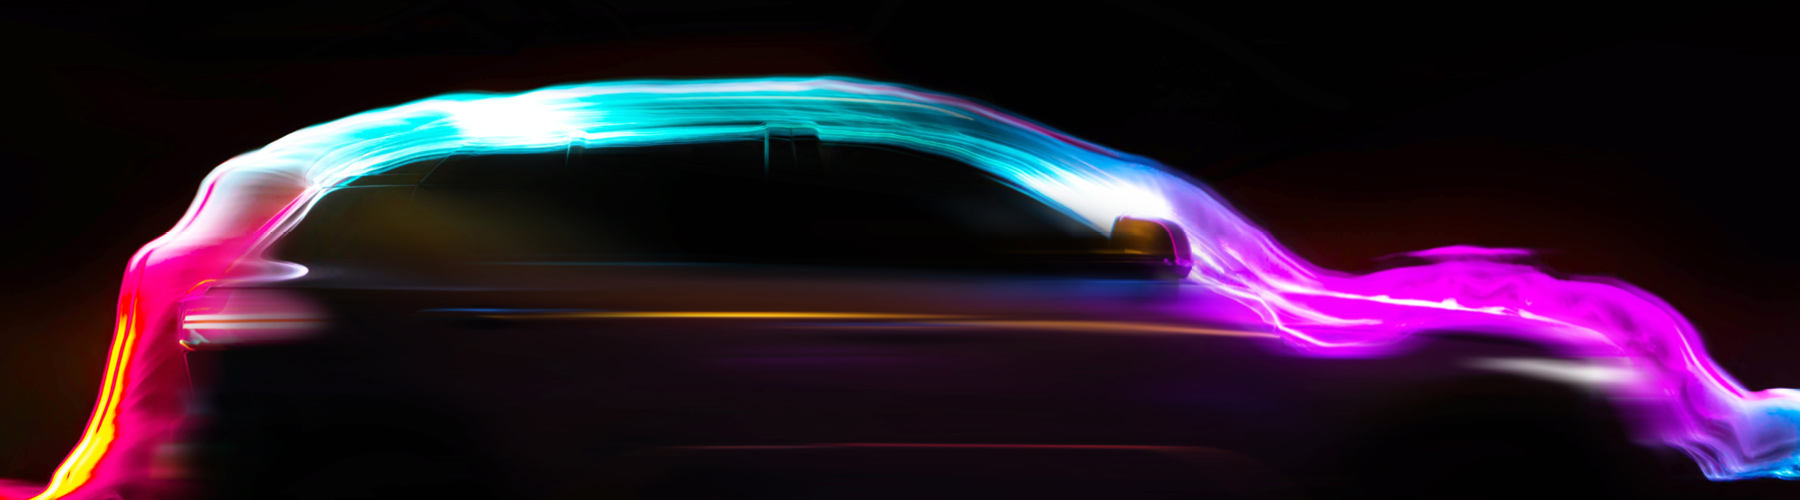 Blurred vehicle with coloured lights streaming over the vehicle